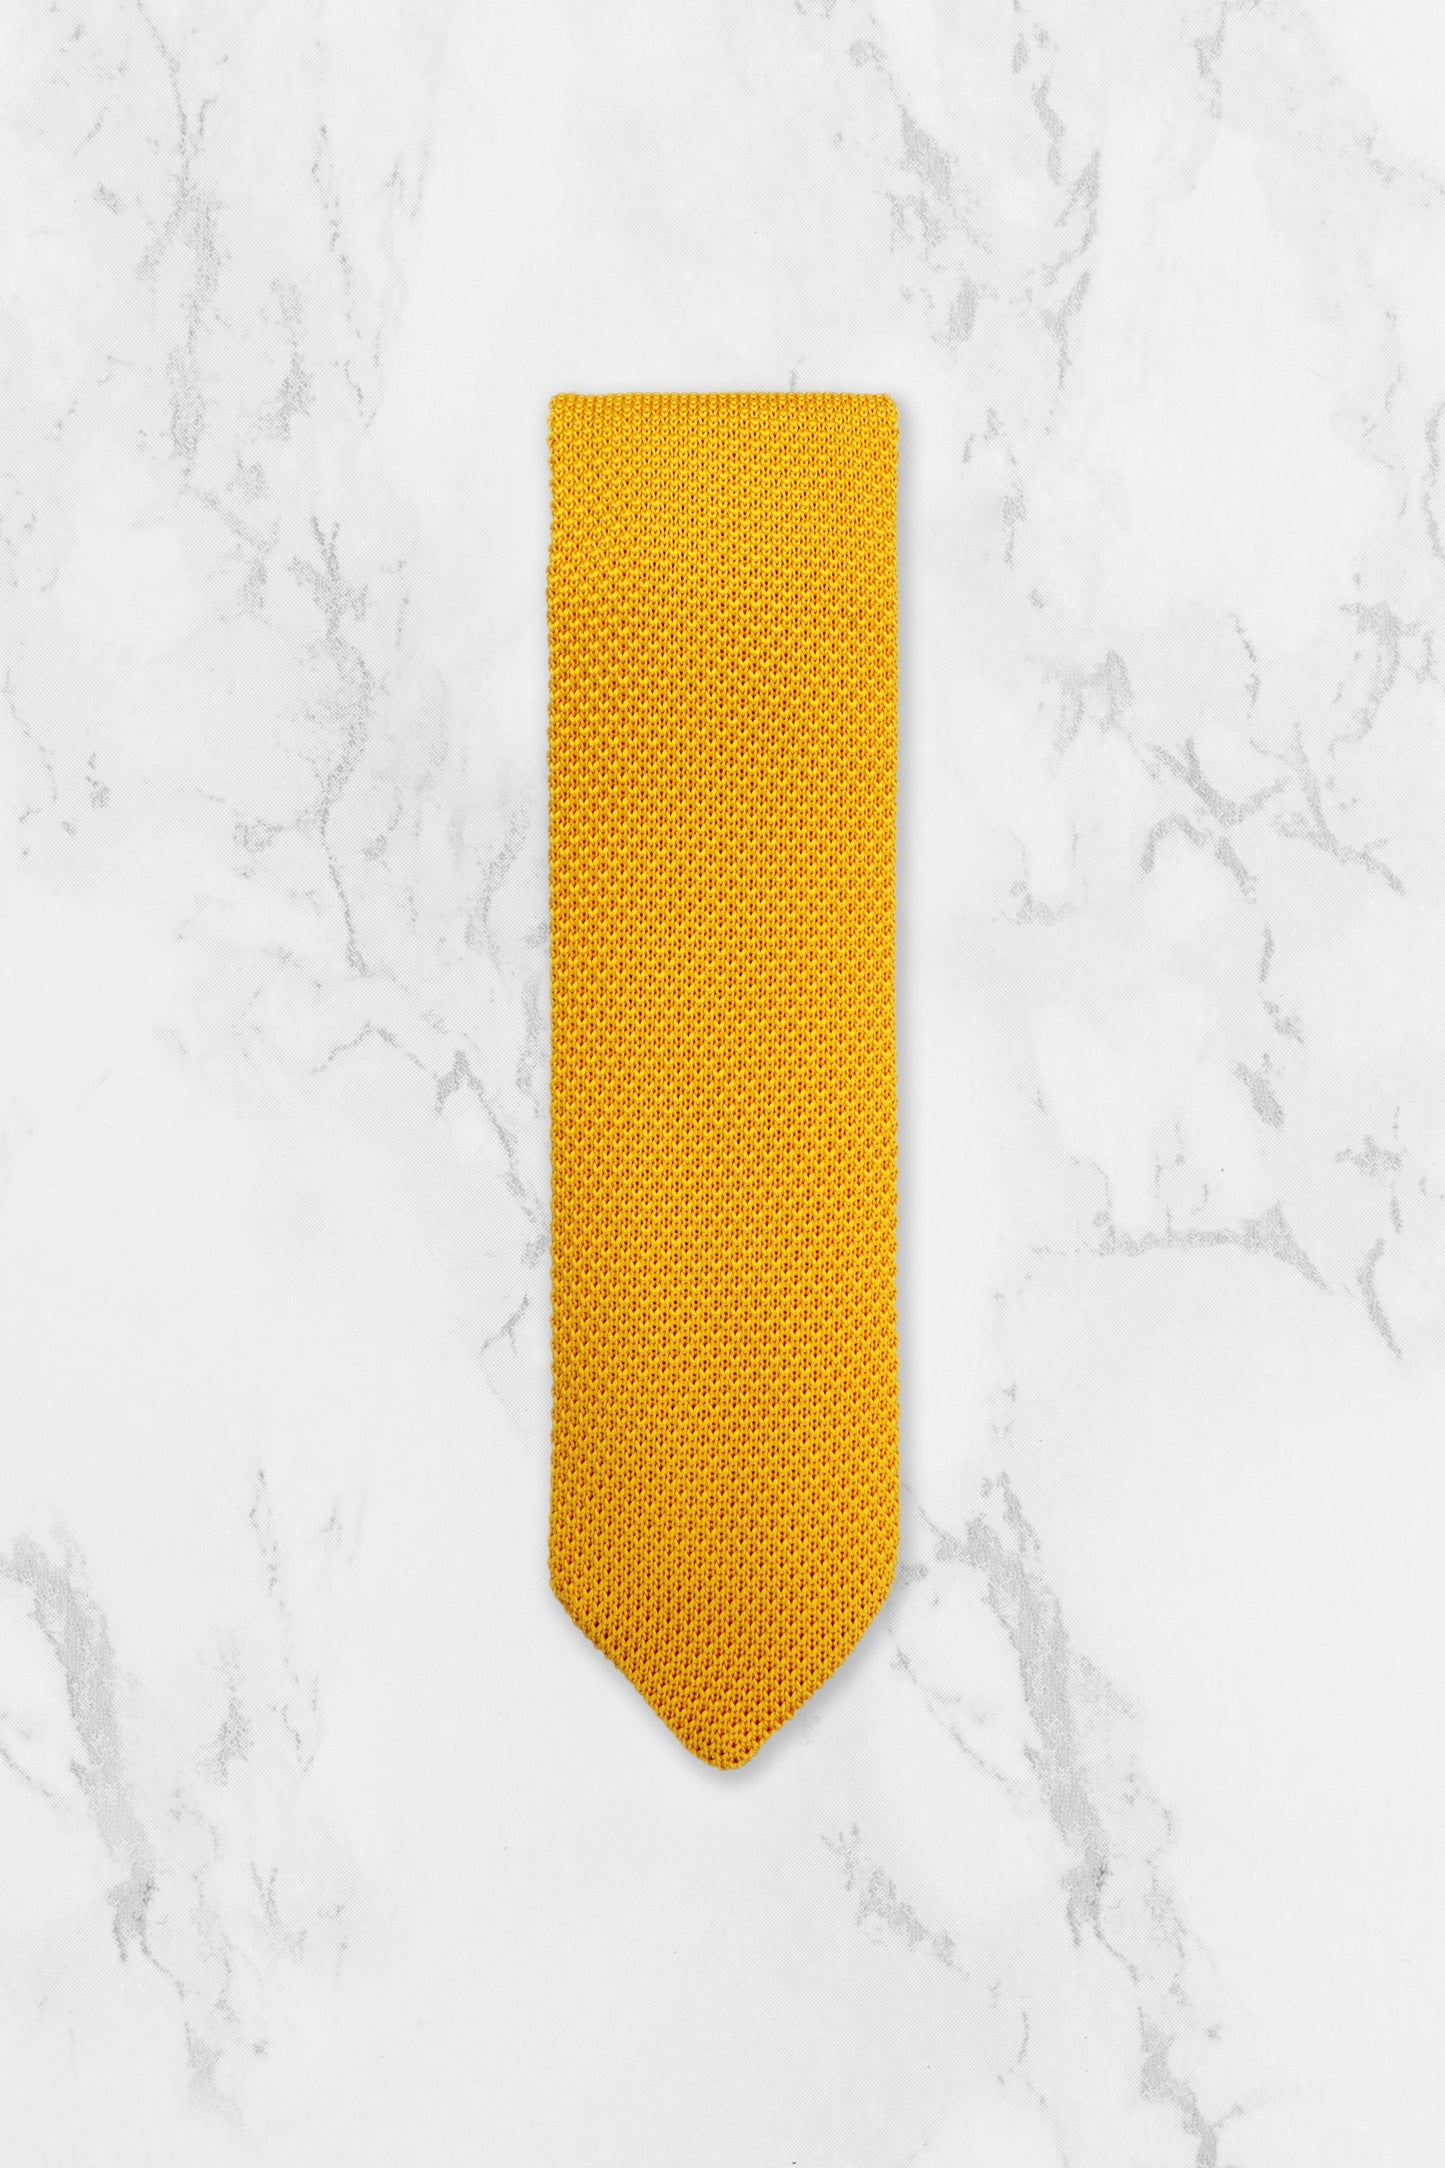 100% Polyester Knitted Bow Tie - Mustard Yellow